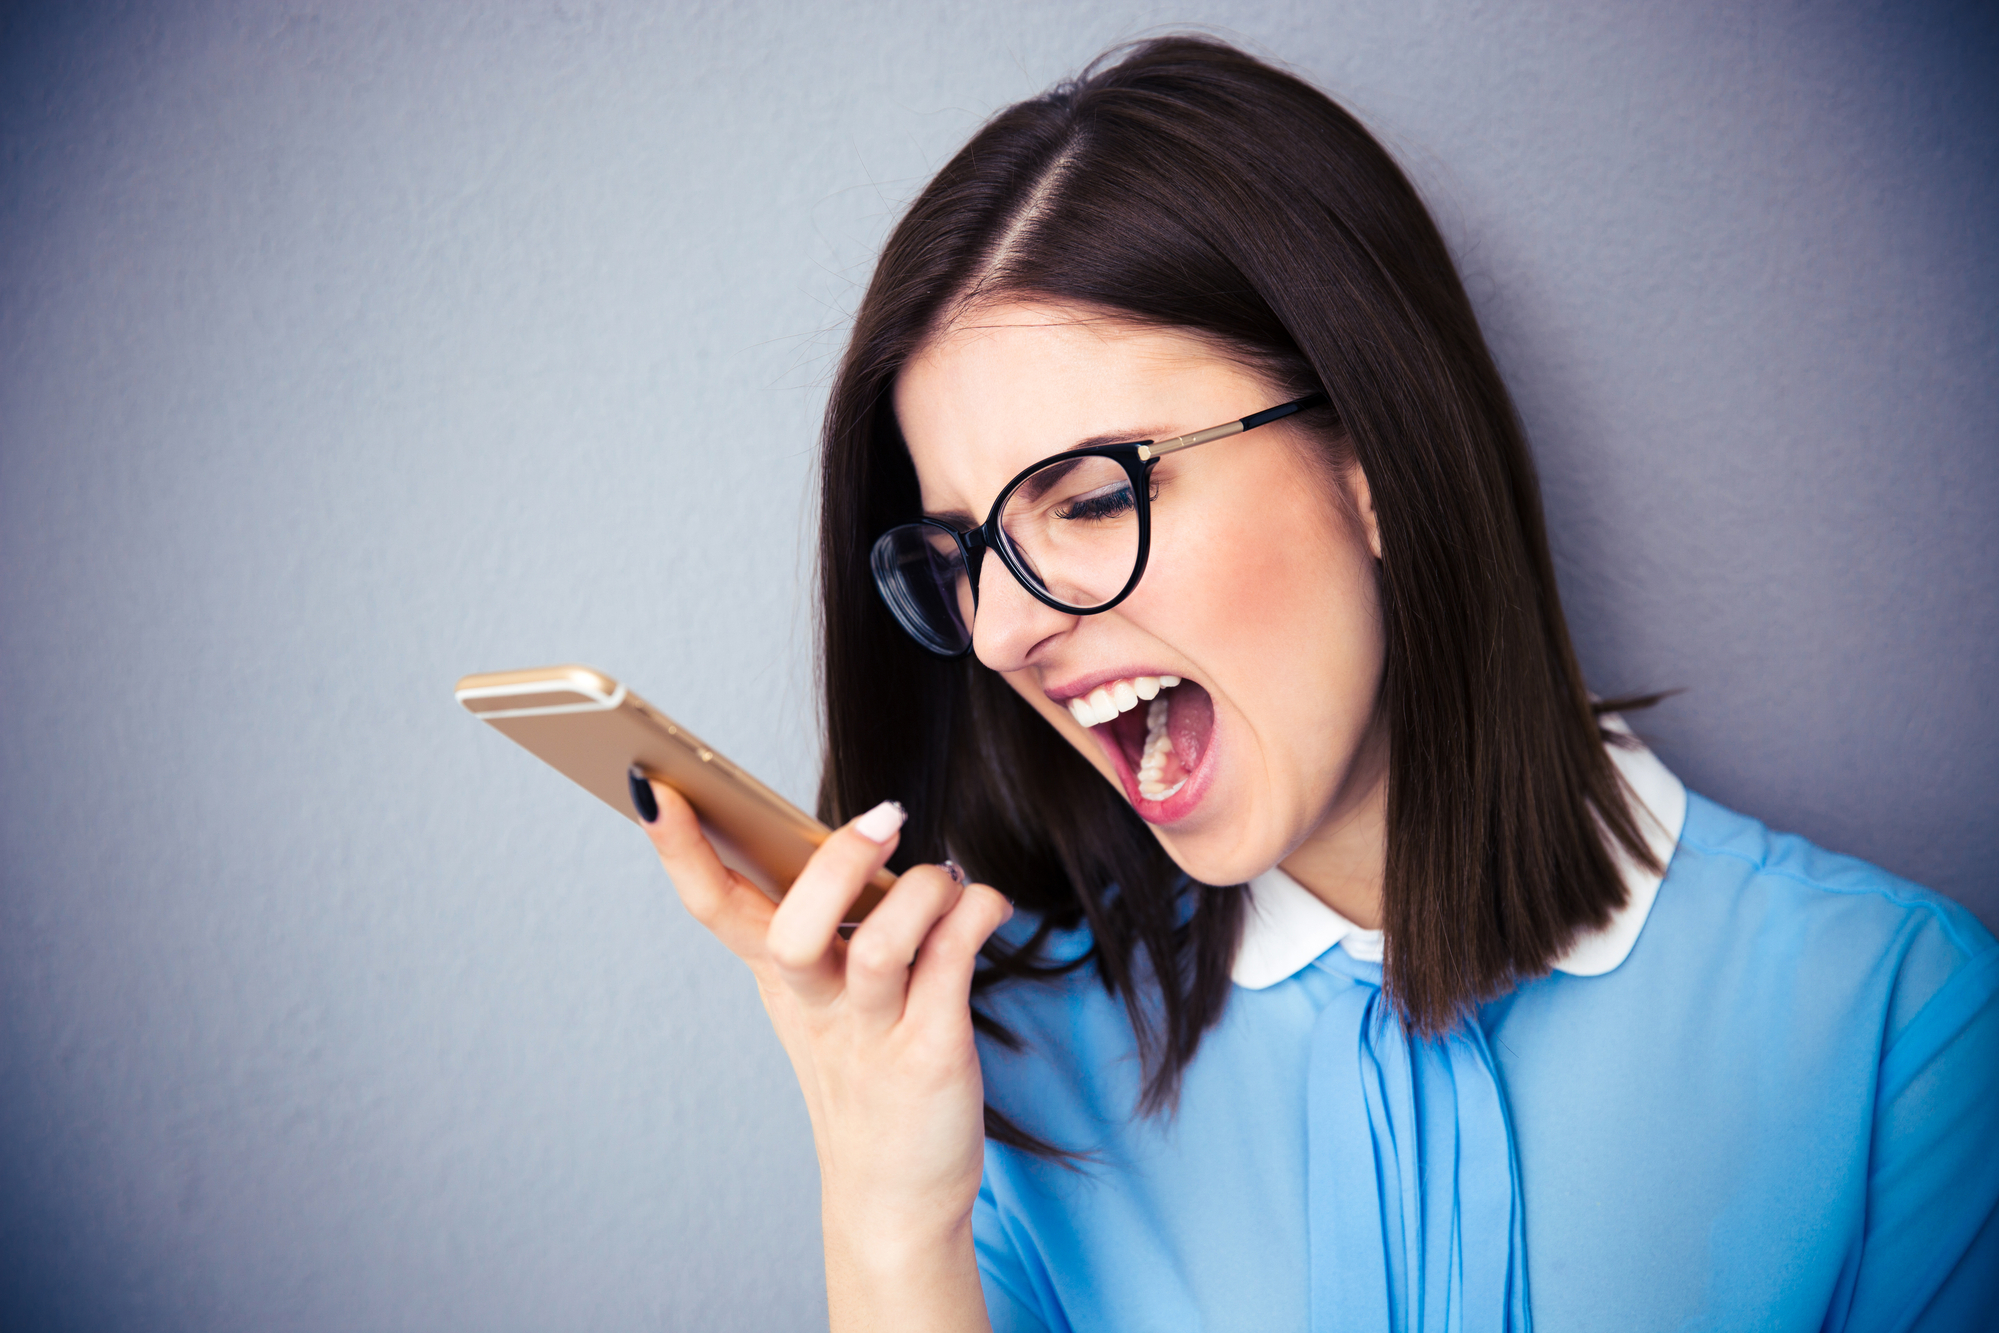 A woman with shoulder-length dark hair and glasses is leaning against a gray wall, holding a smartphone. She is wearing a light blue blouse and appears to be shouting into the phone, her mouth wide open in an expressive manner.